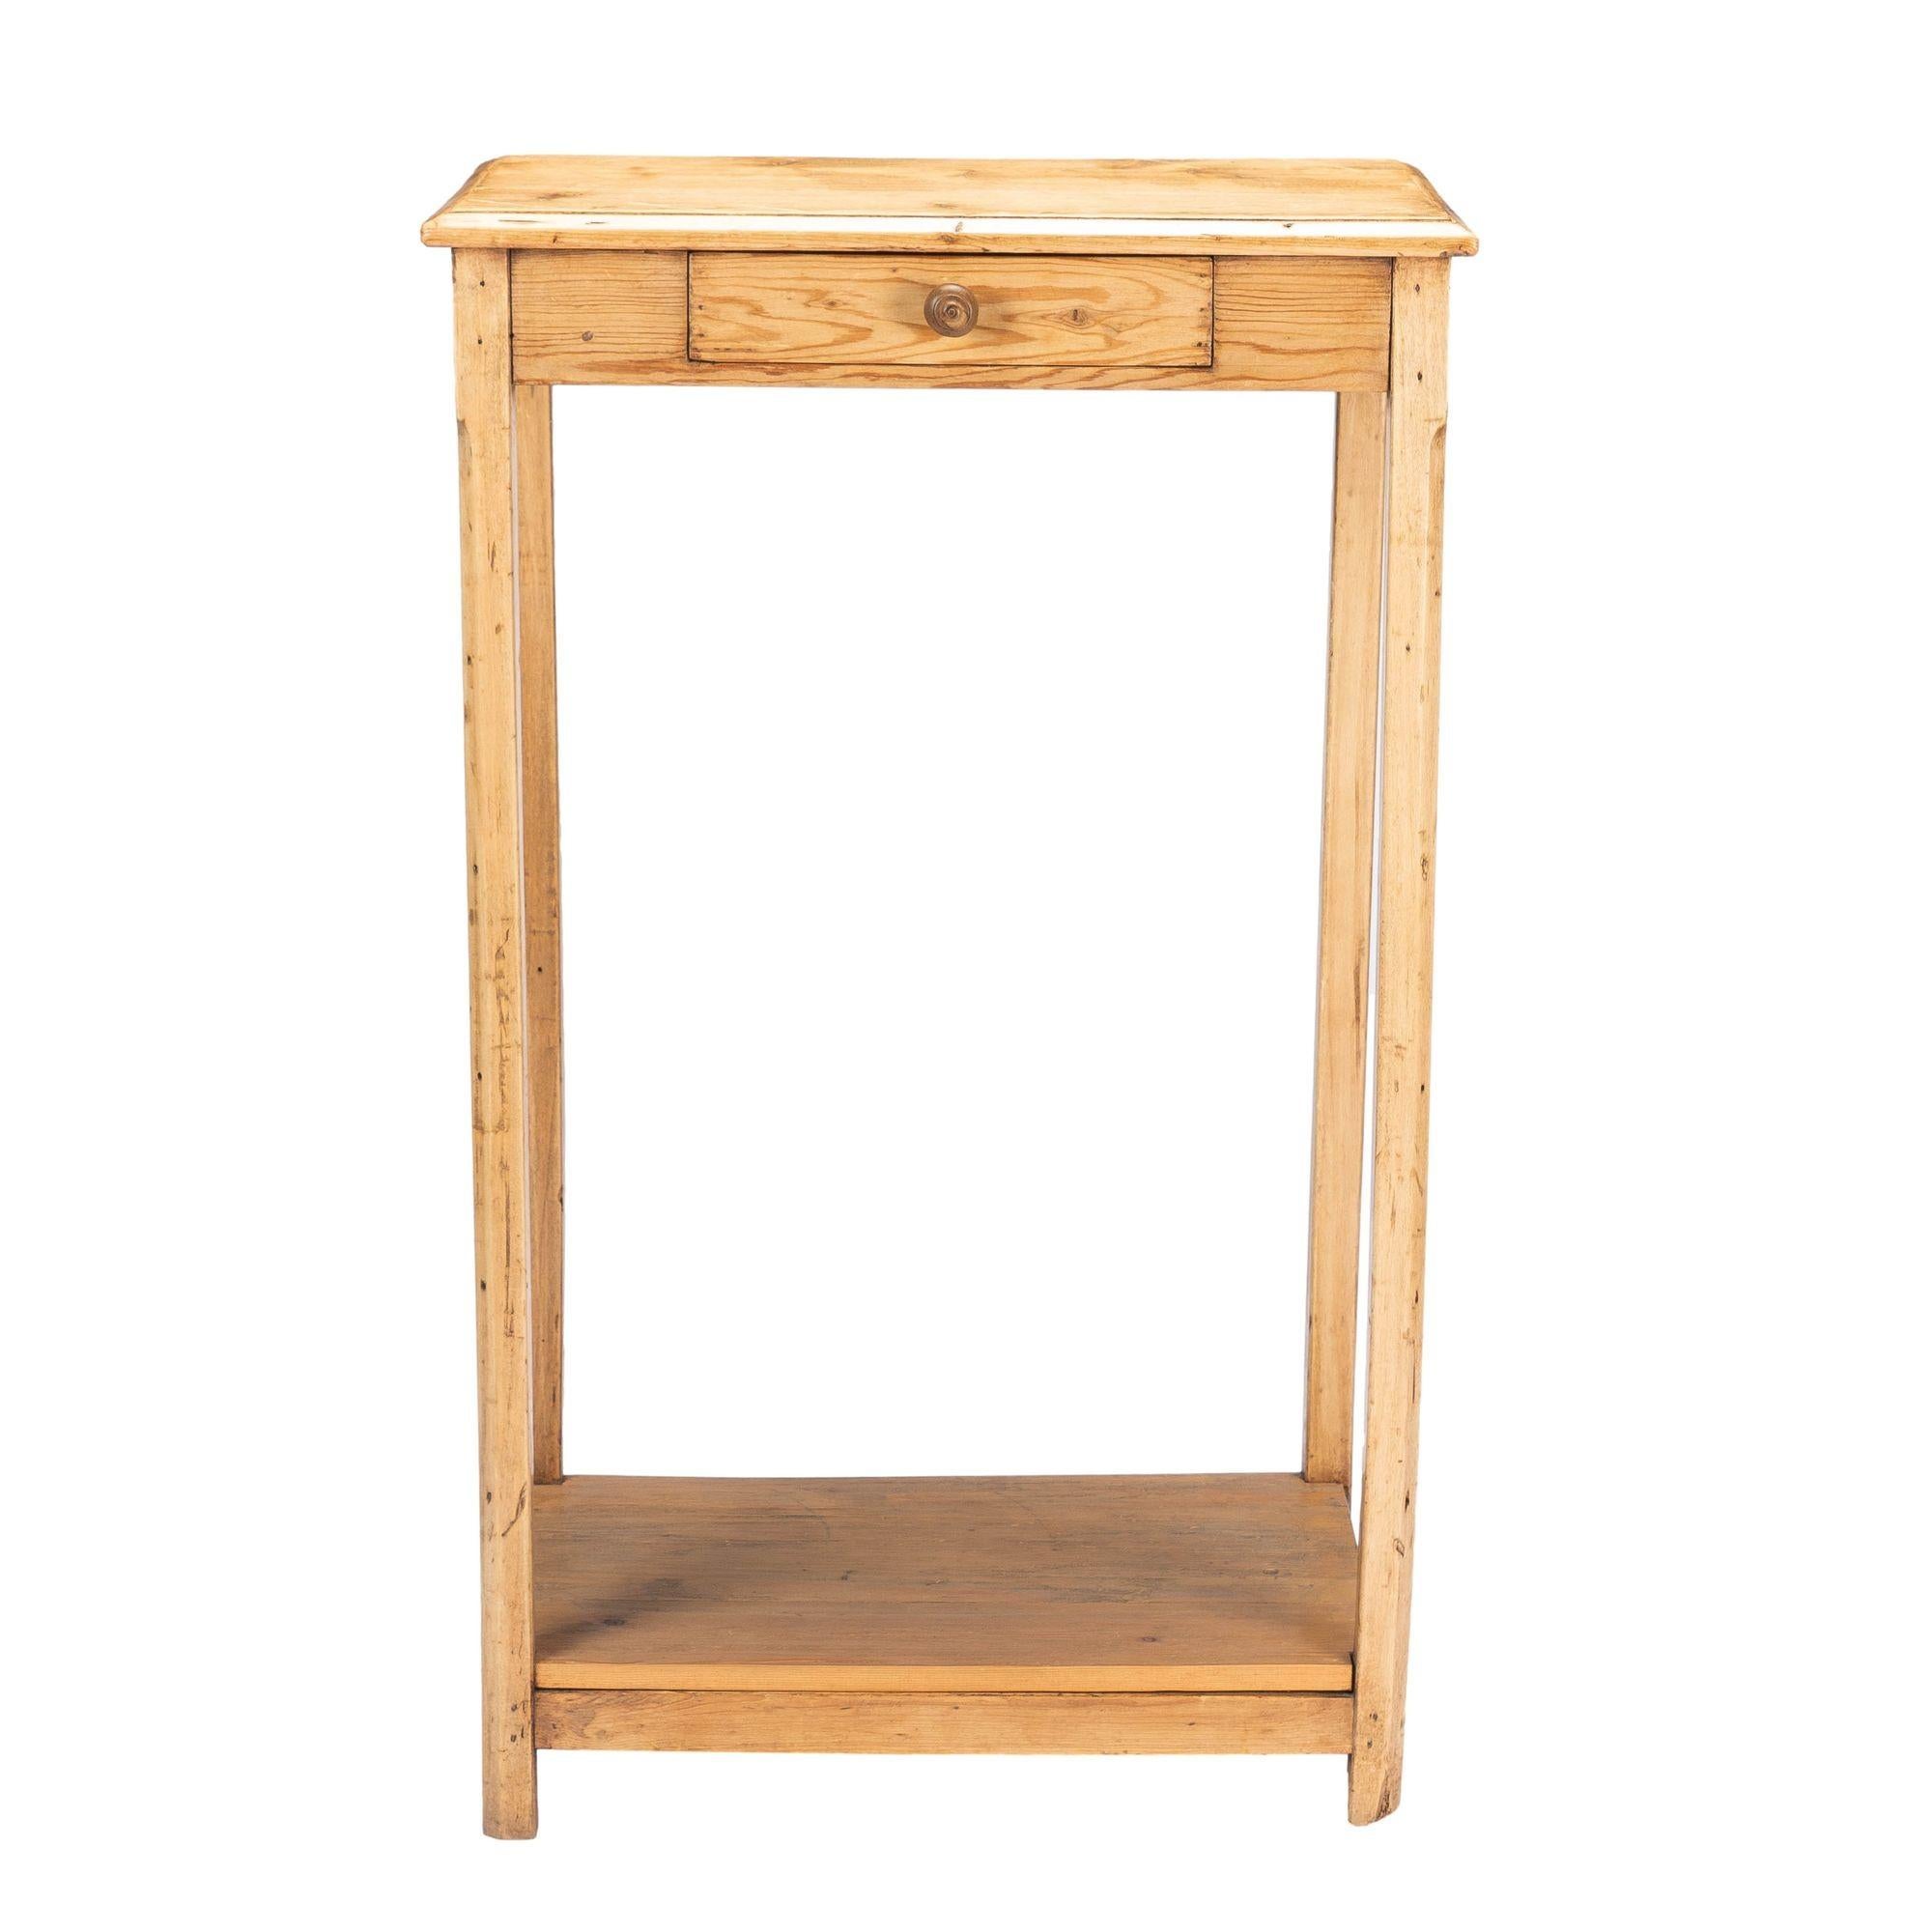 Unfinished English fir writing stand or clerks table. The table features an apron drawer with turned hardwood knob and square chamfered legs joined by a box stretcher. The shelf fitted to the box stretcher is a later addition. Legs have been leveled